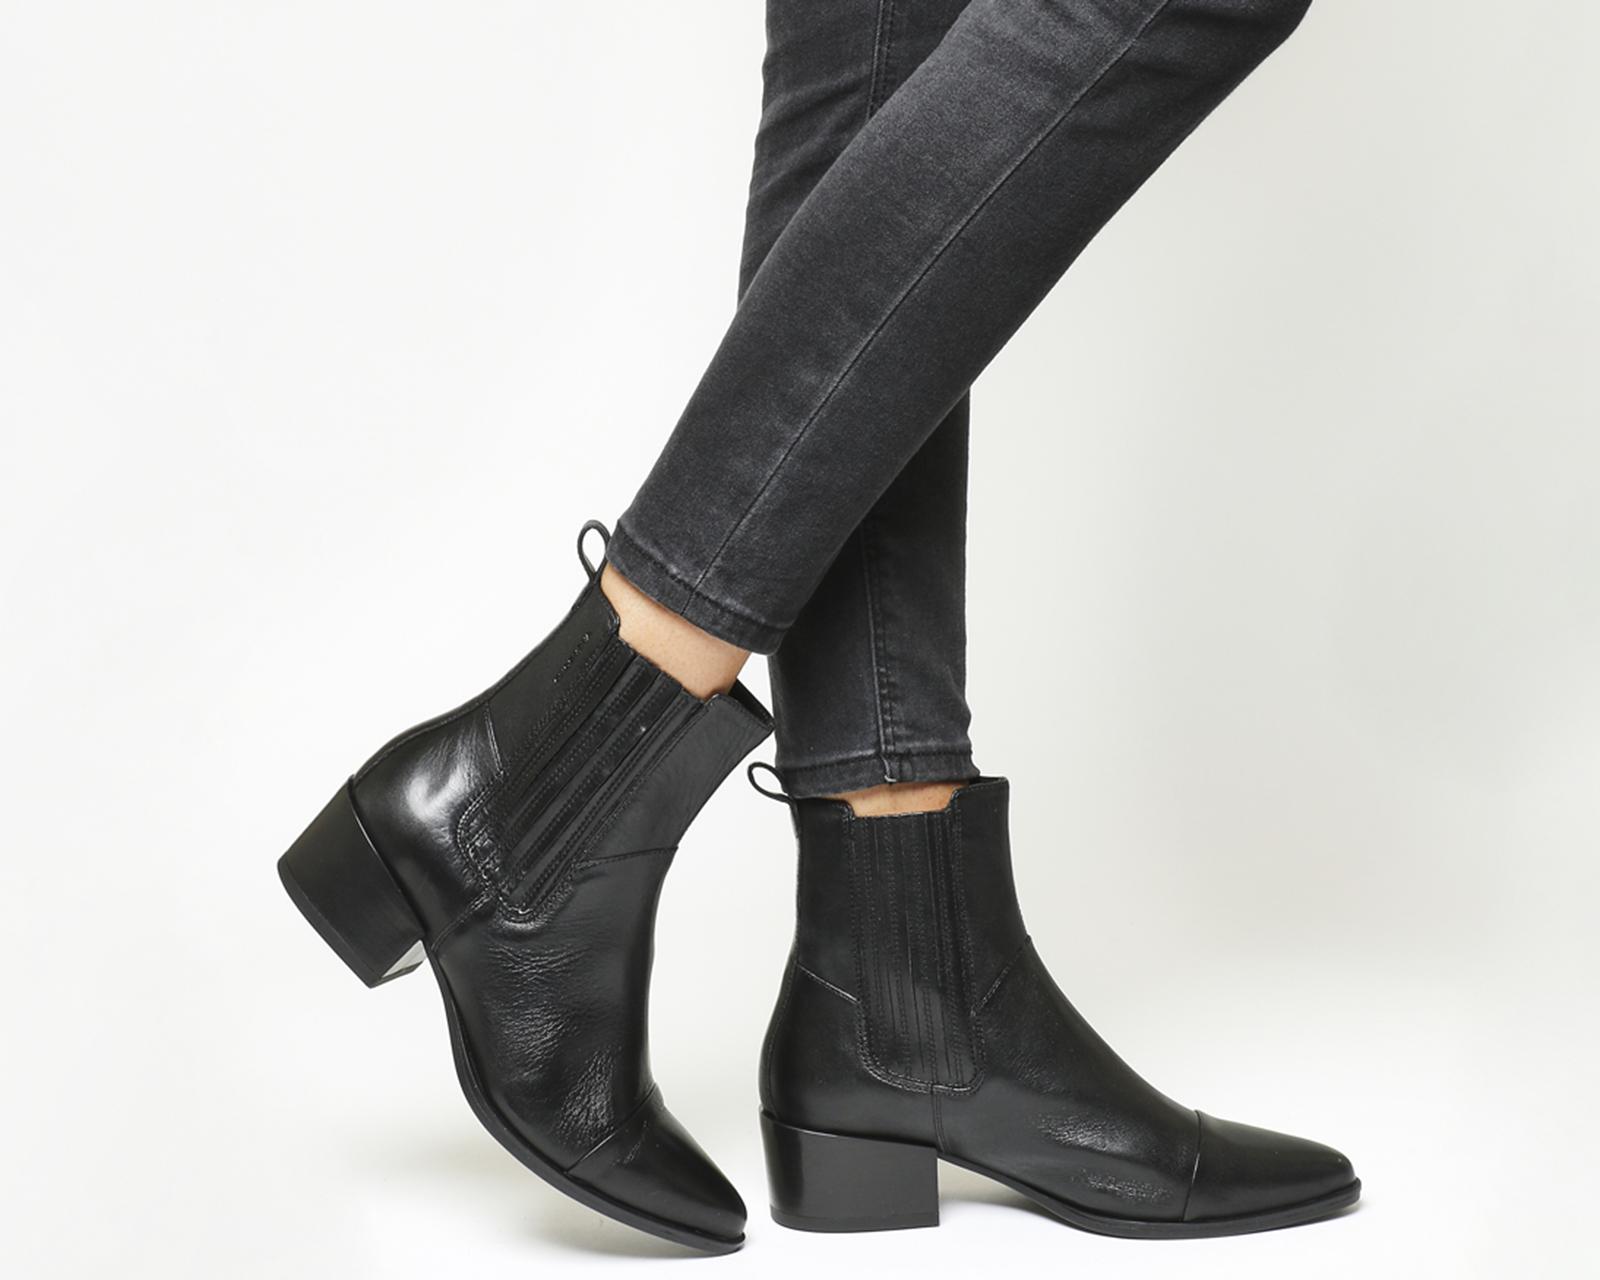 Vagabond Leather Marja Chelsea Boots in Black - Lyst